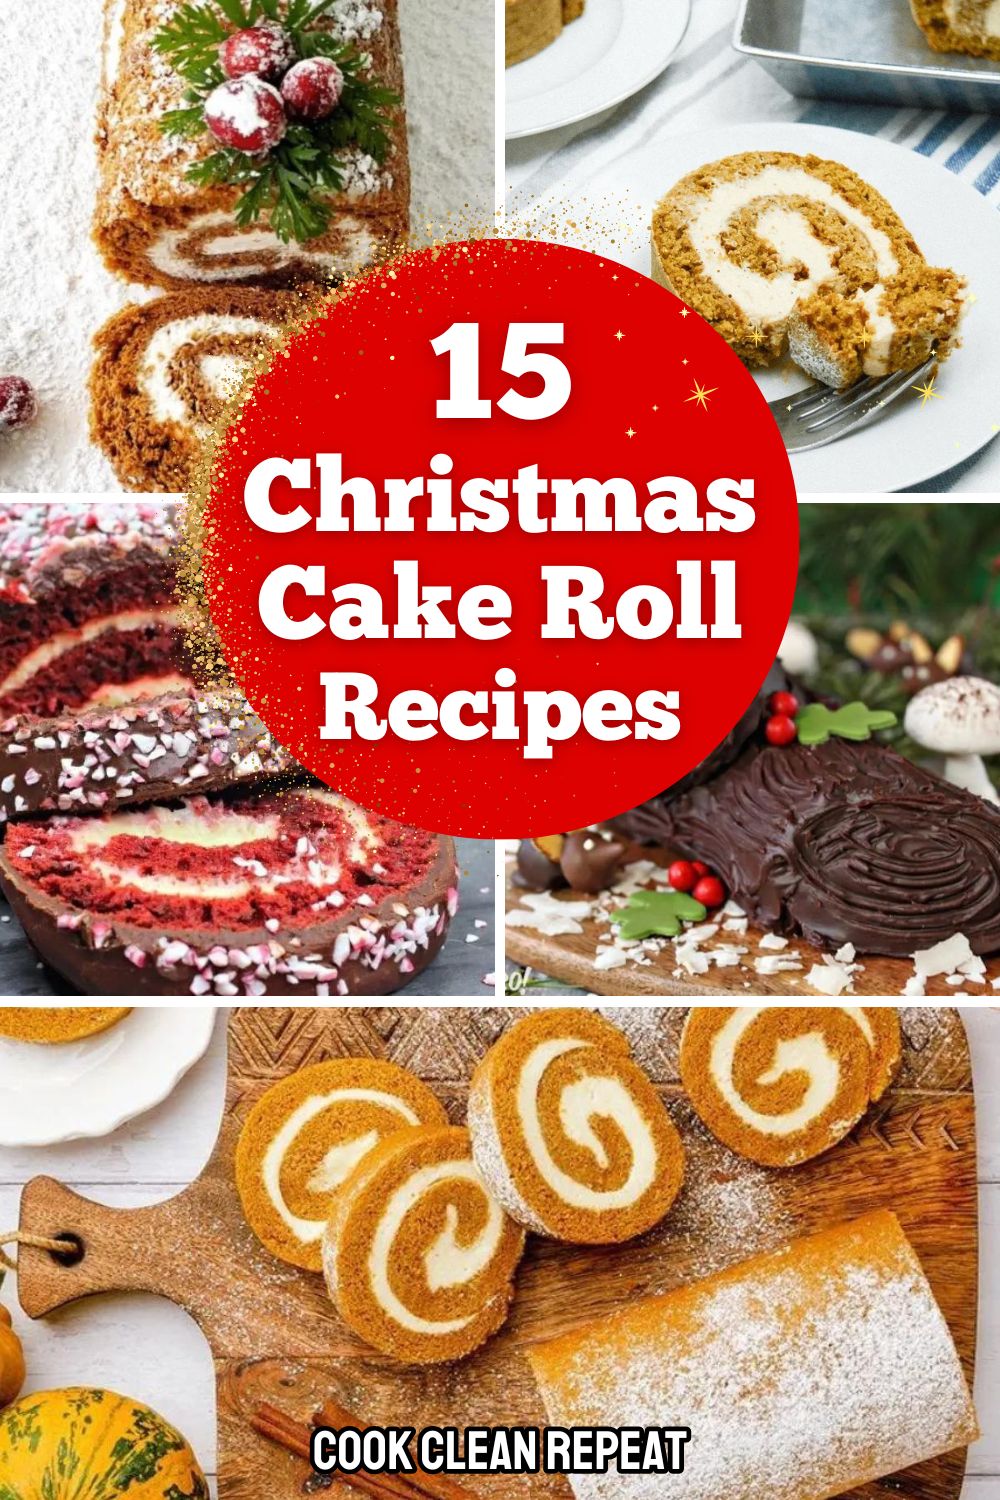 Christmas Cake Roll Recipes to try